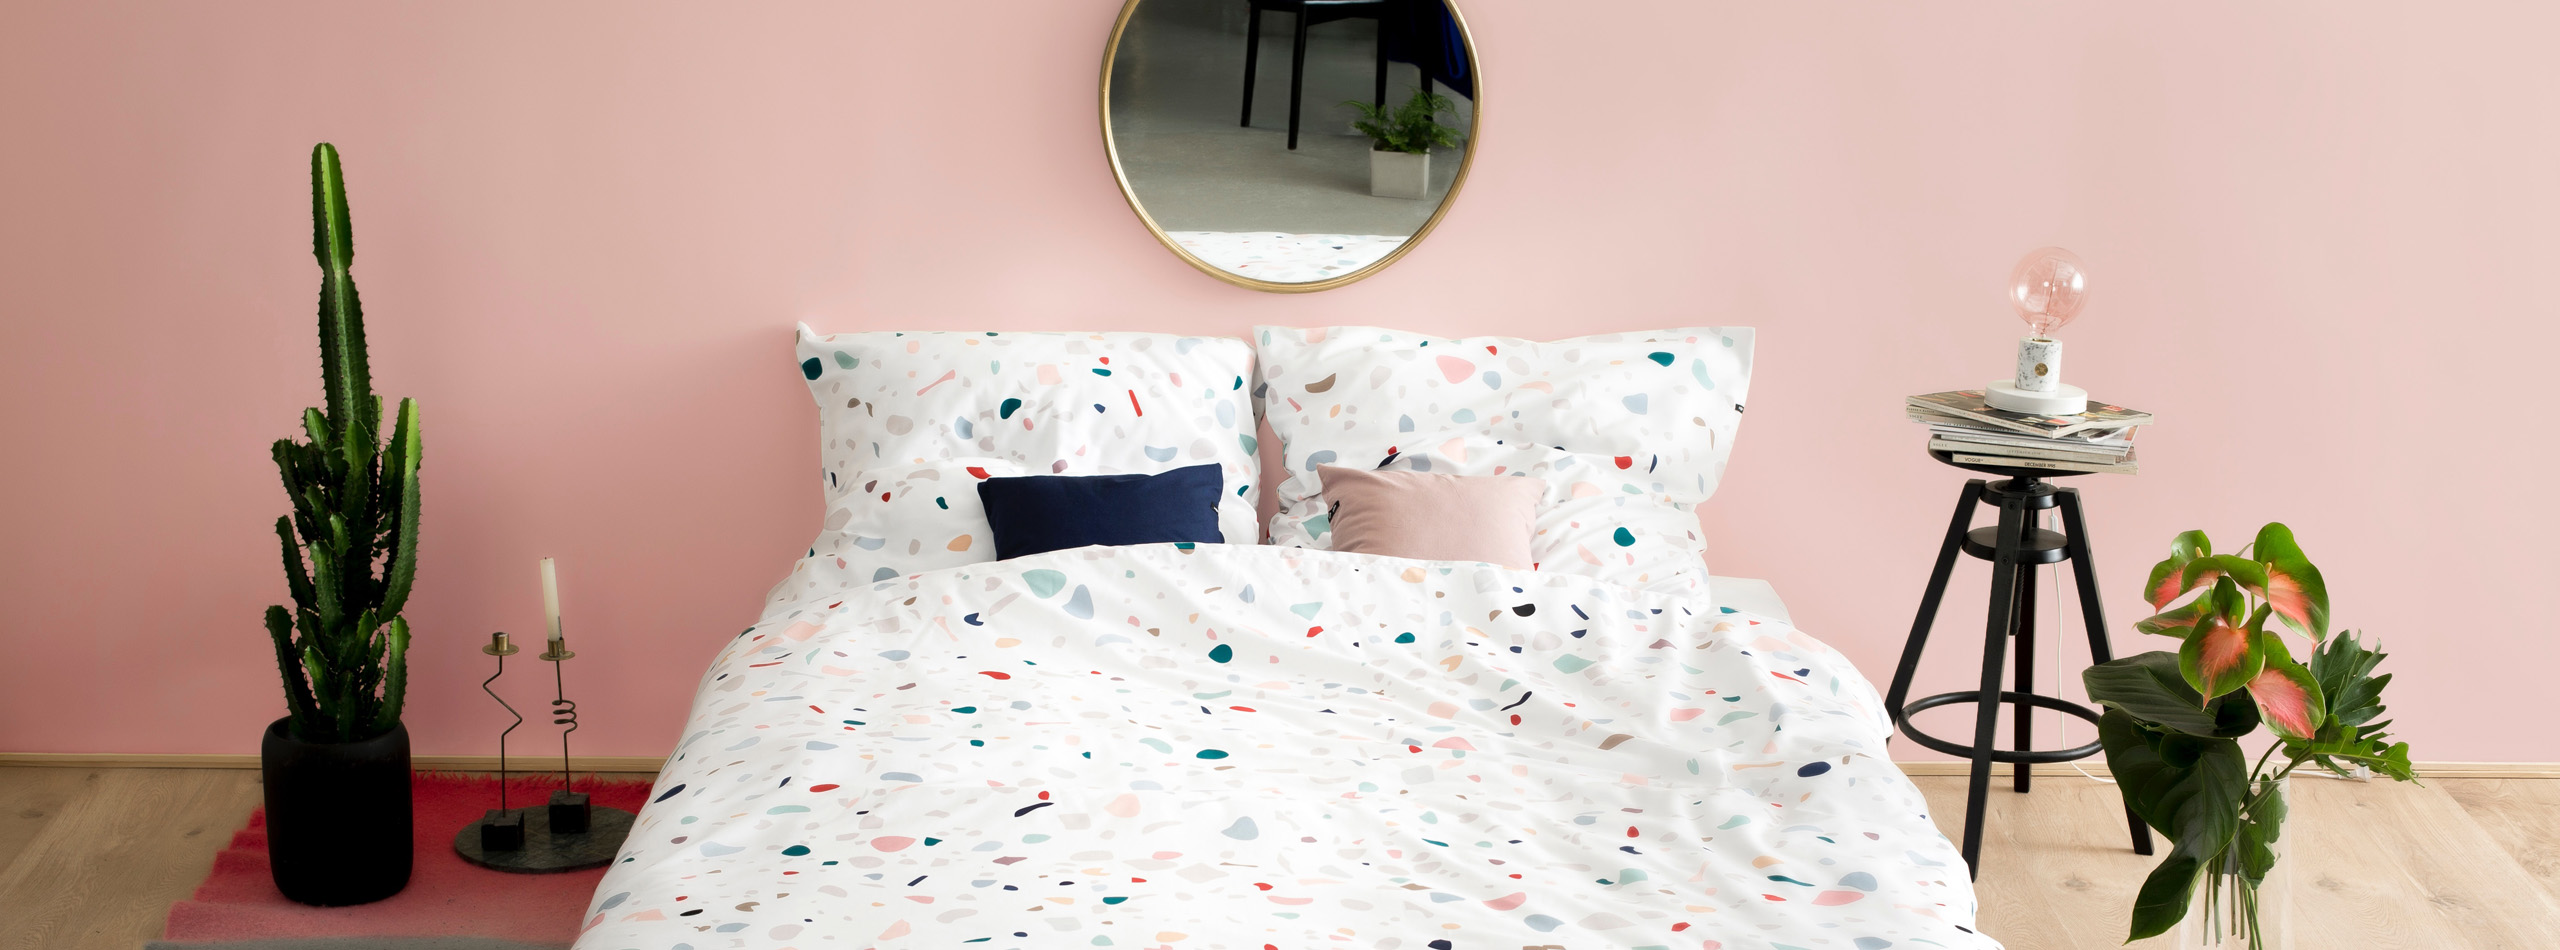 Picture of a bed with custom printed duvet covers